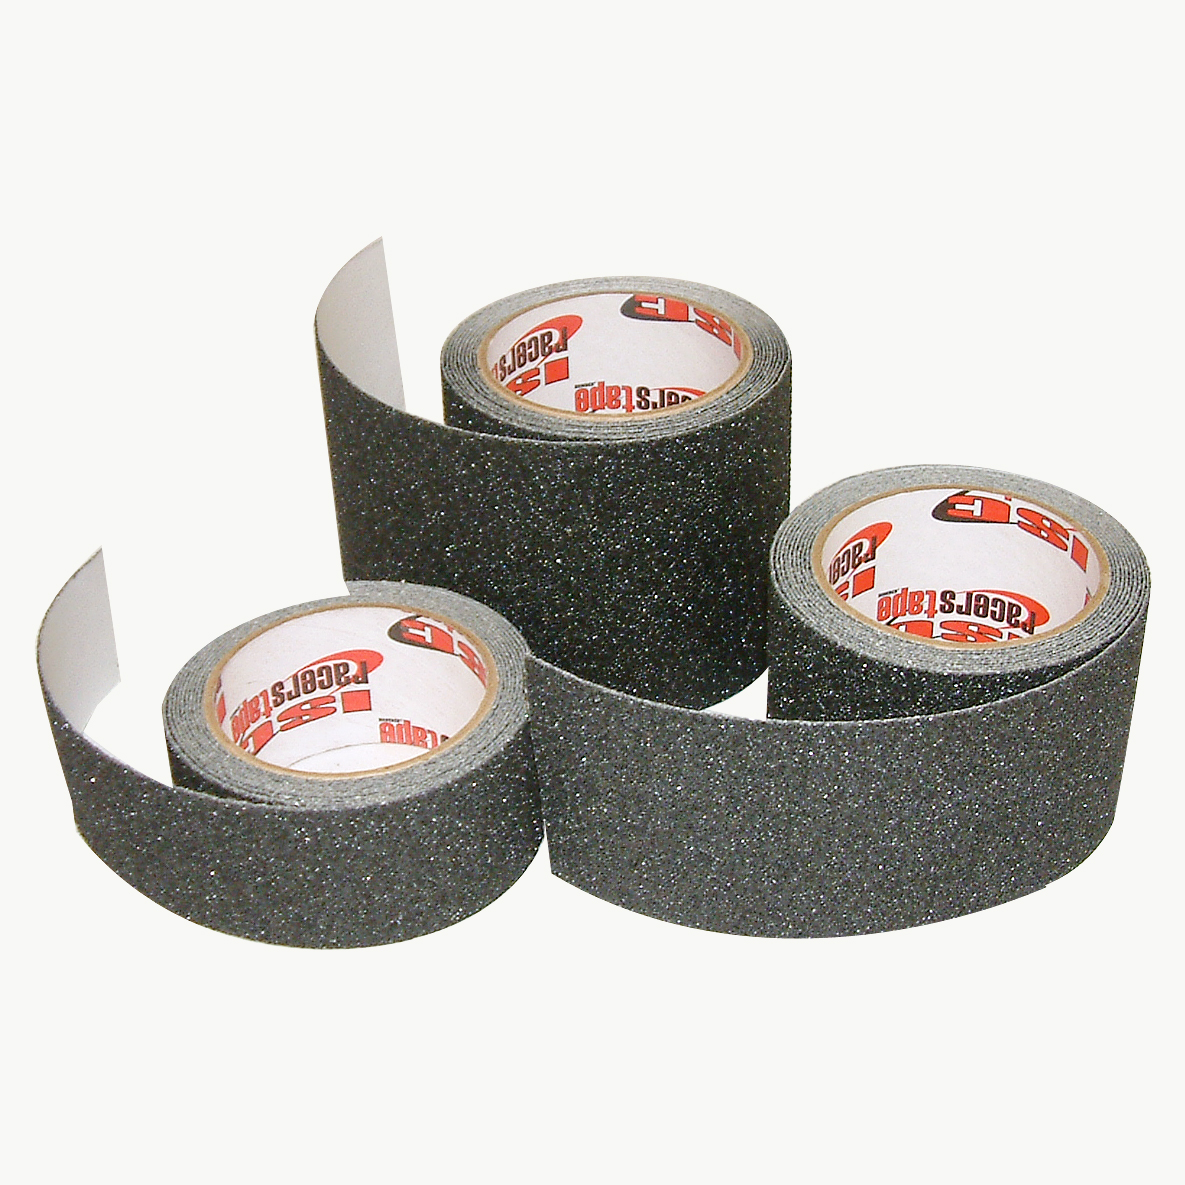 Anti Slip Self Adhesive Grit Tape 10 Metres for Factory Workshops & Offices 